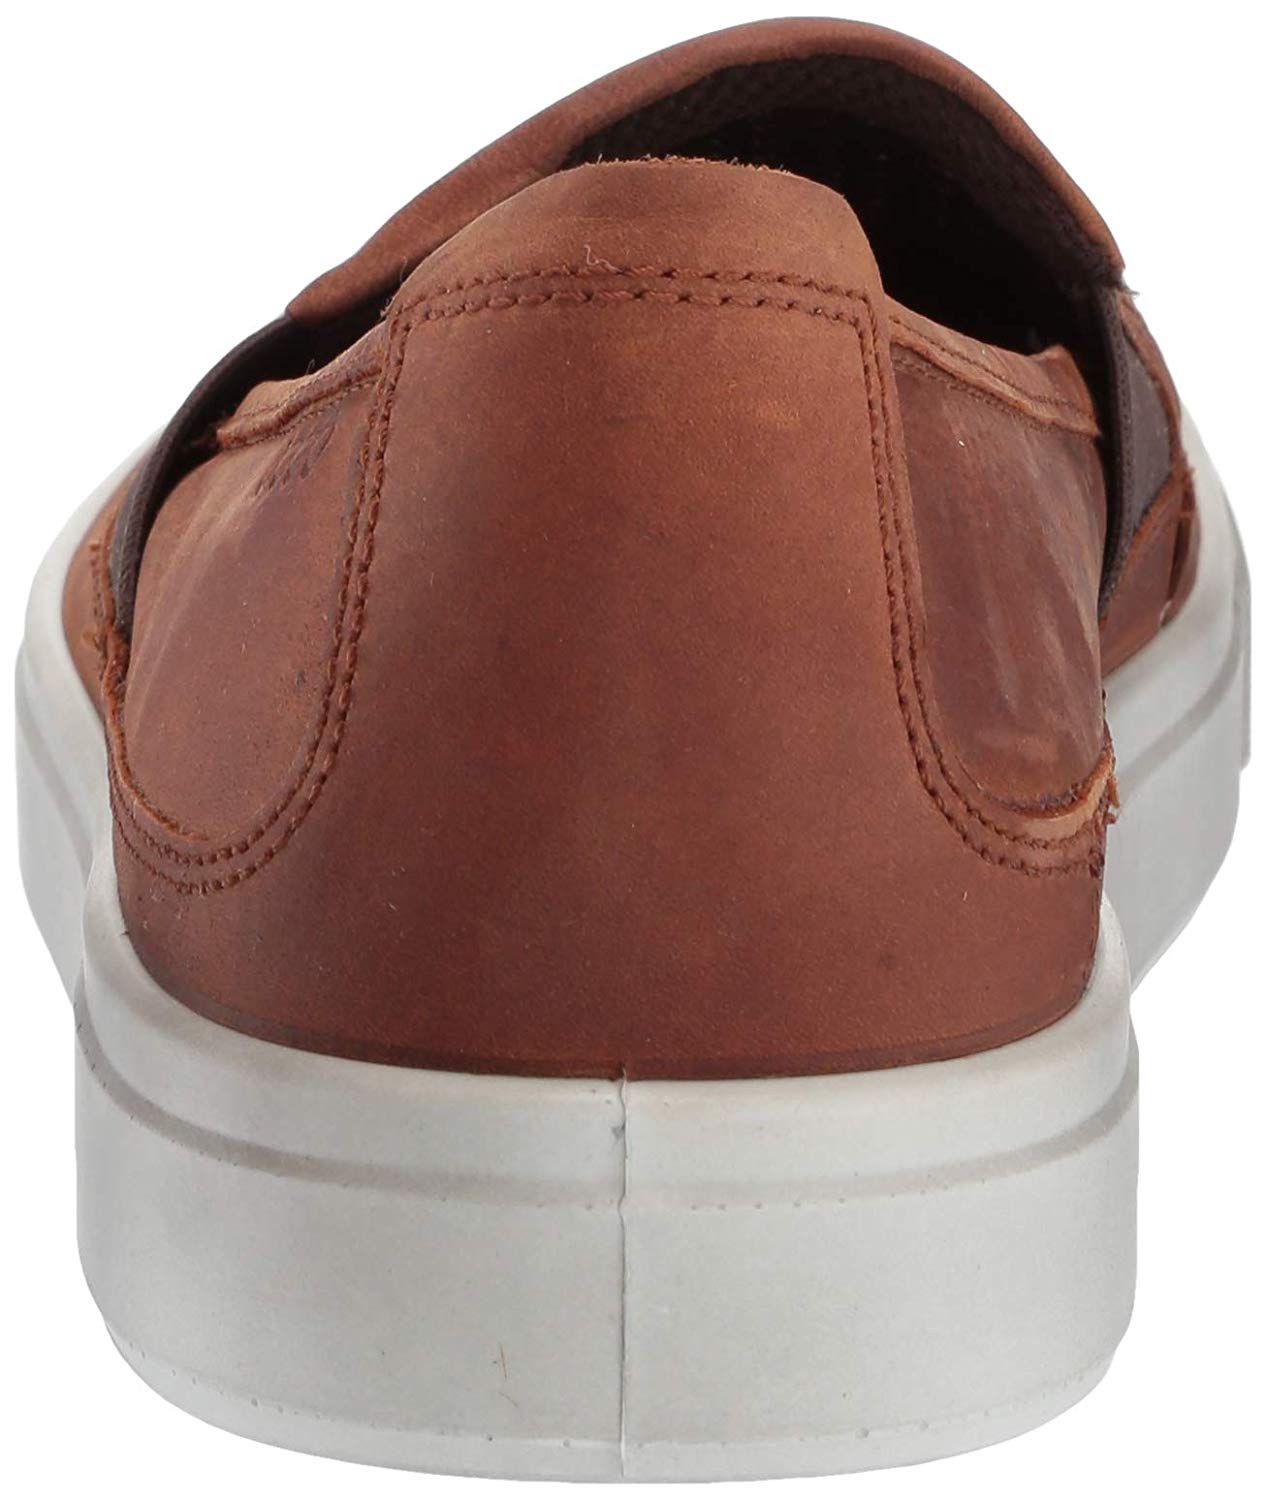 ECCO Mens Kyle Leather Low Top Slip On Fashion Sneakers ...